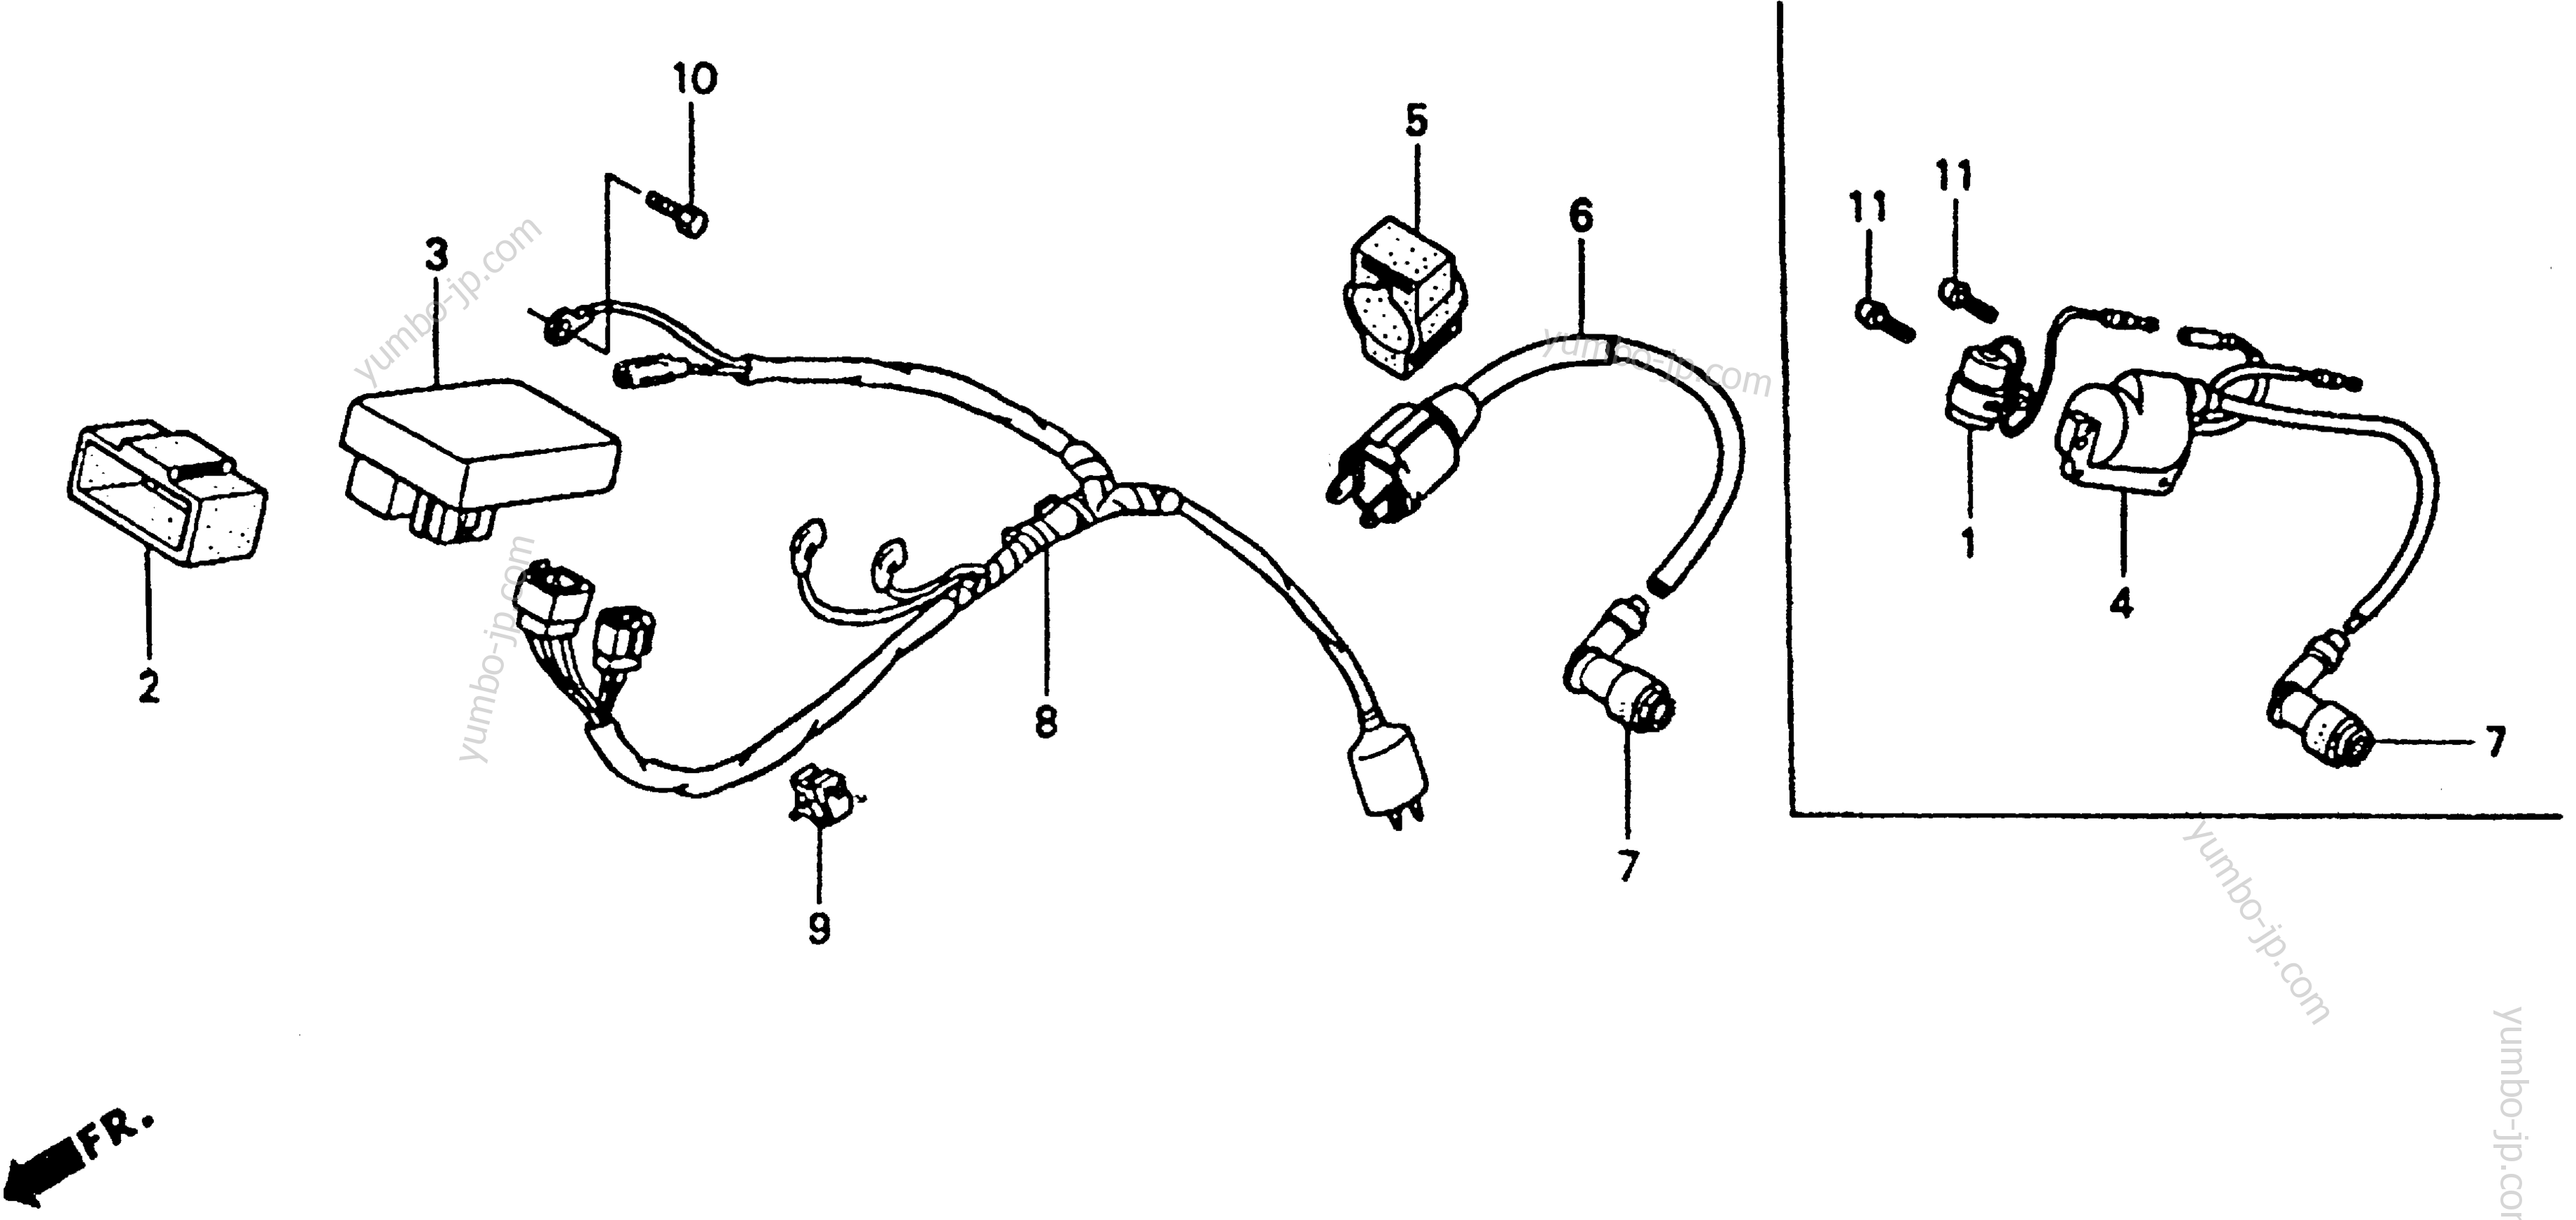 WIRE HARNESS for motorcycles HONDA XR80R A 1993 year